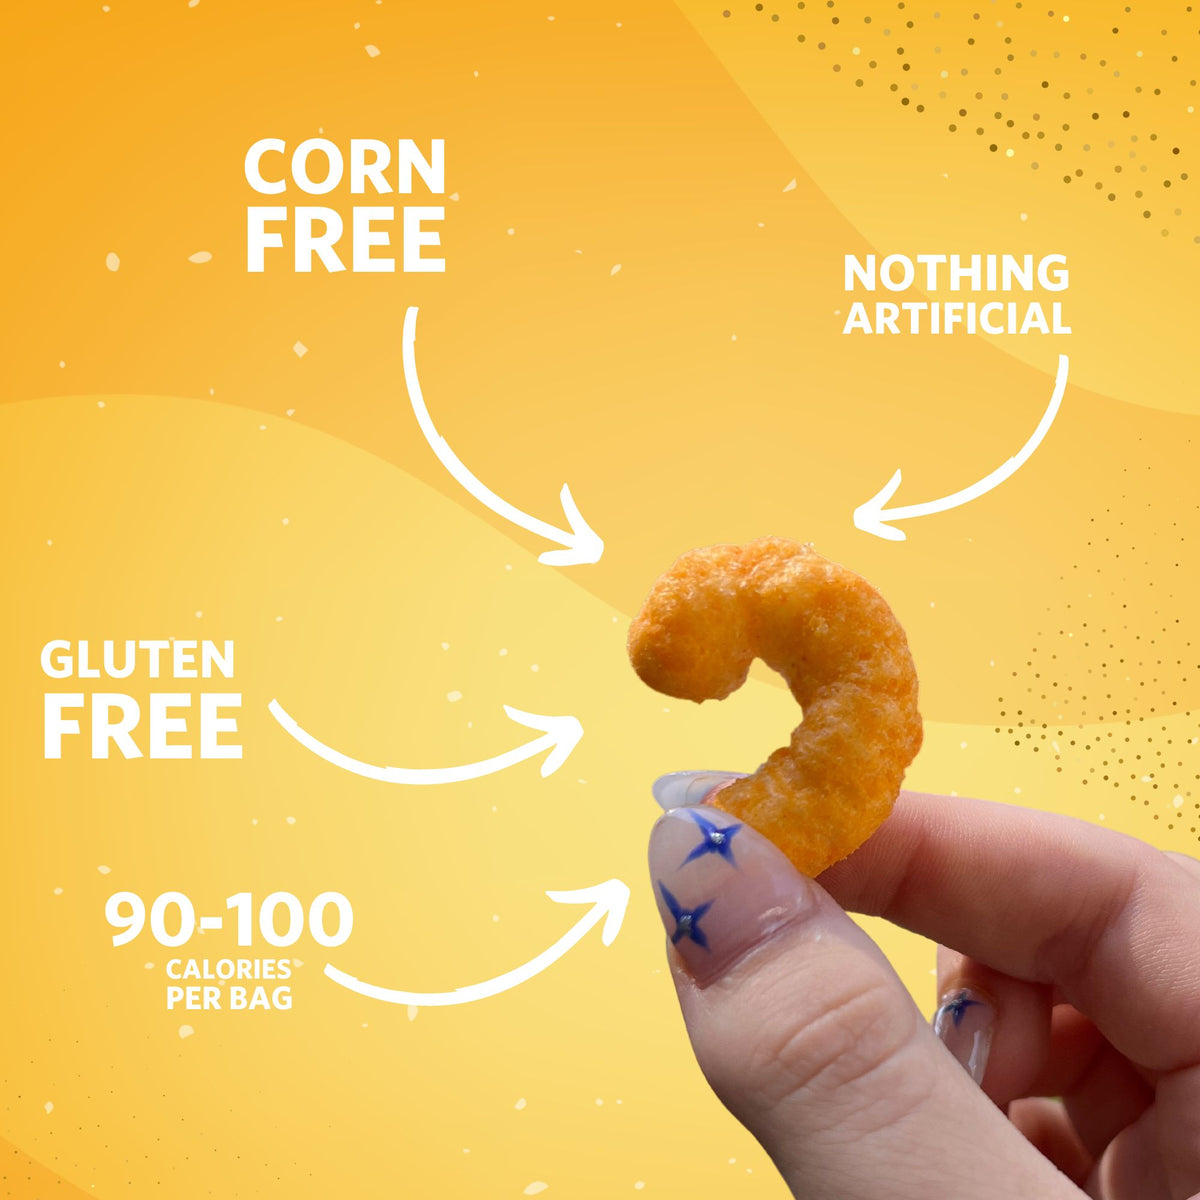 Hand holding puff. Corn free, nothing artificial, gluten free and 90-100 calories.